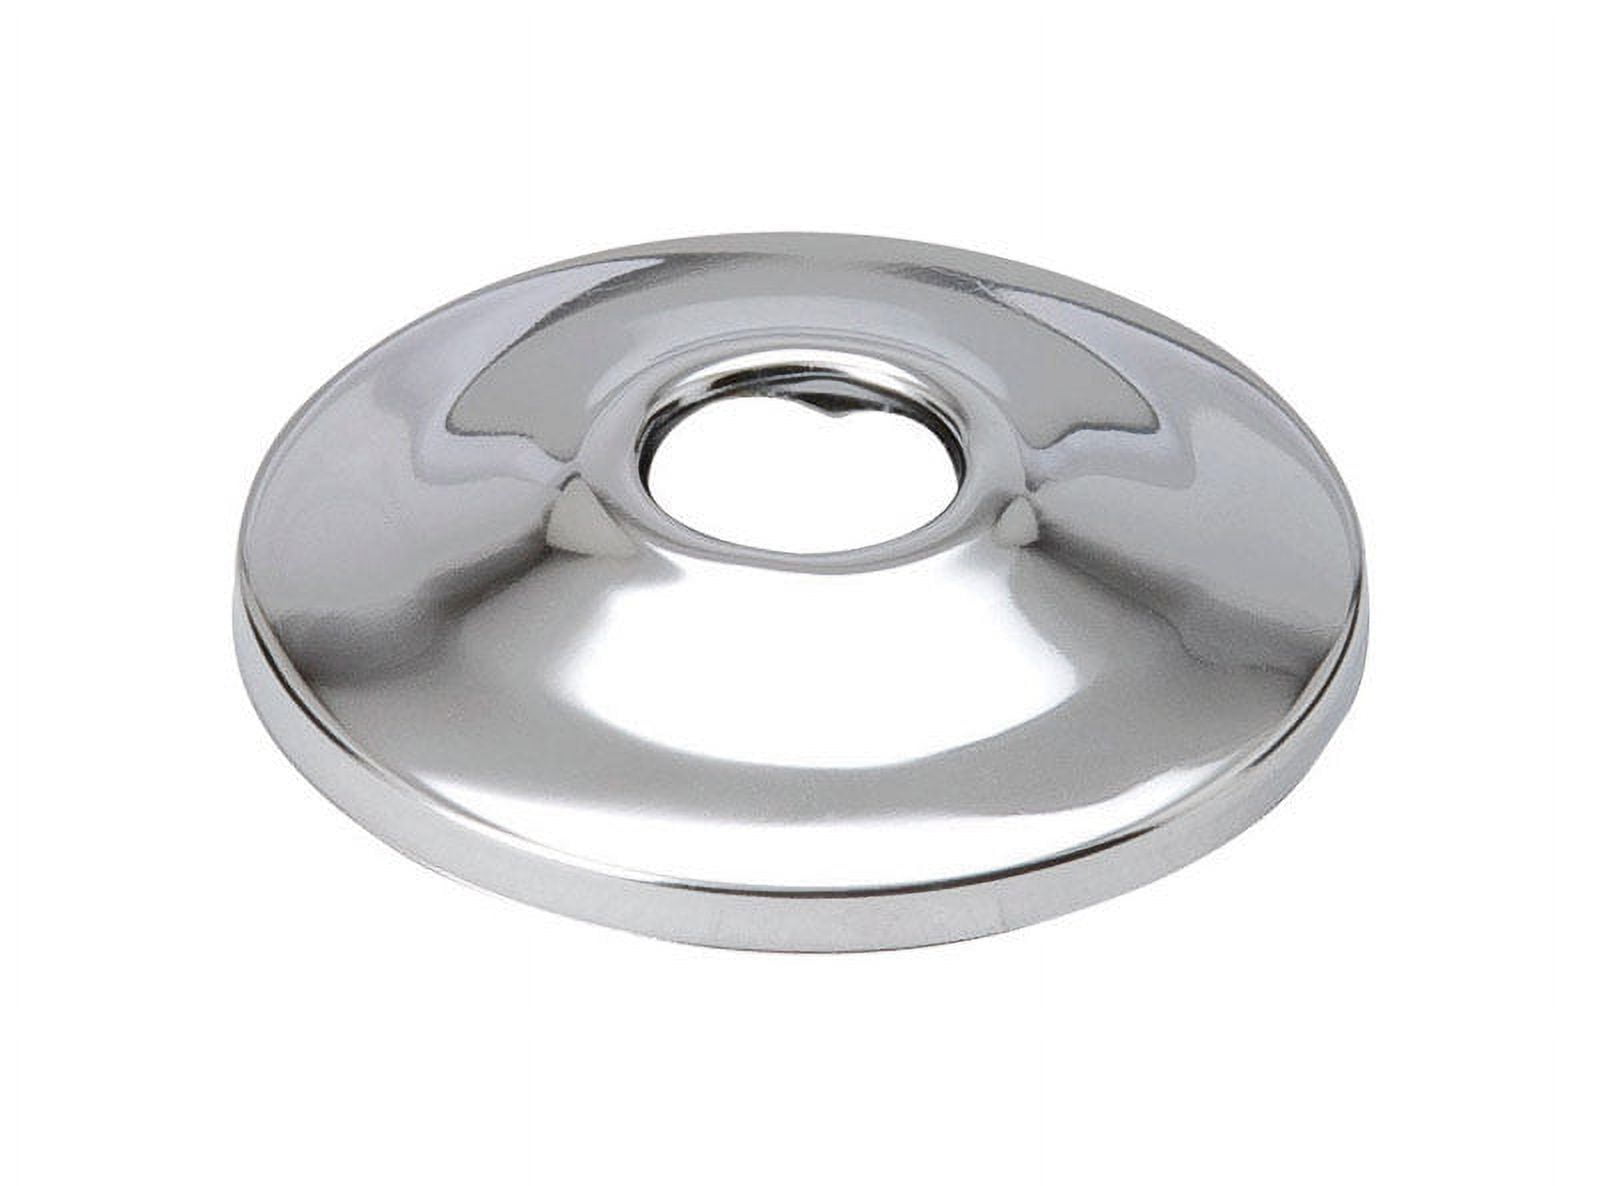 Mueller 4161048 0.75 in. Escutcheon Ring Chrome Plated